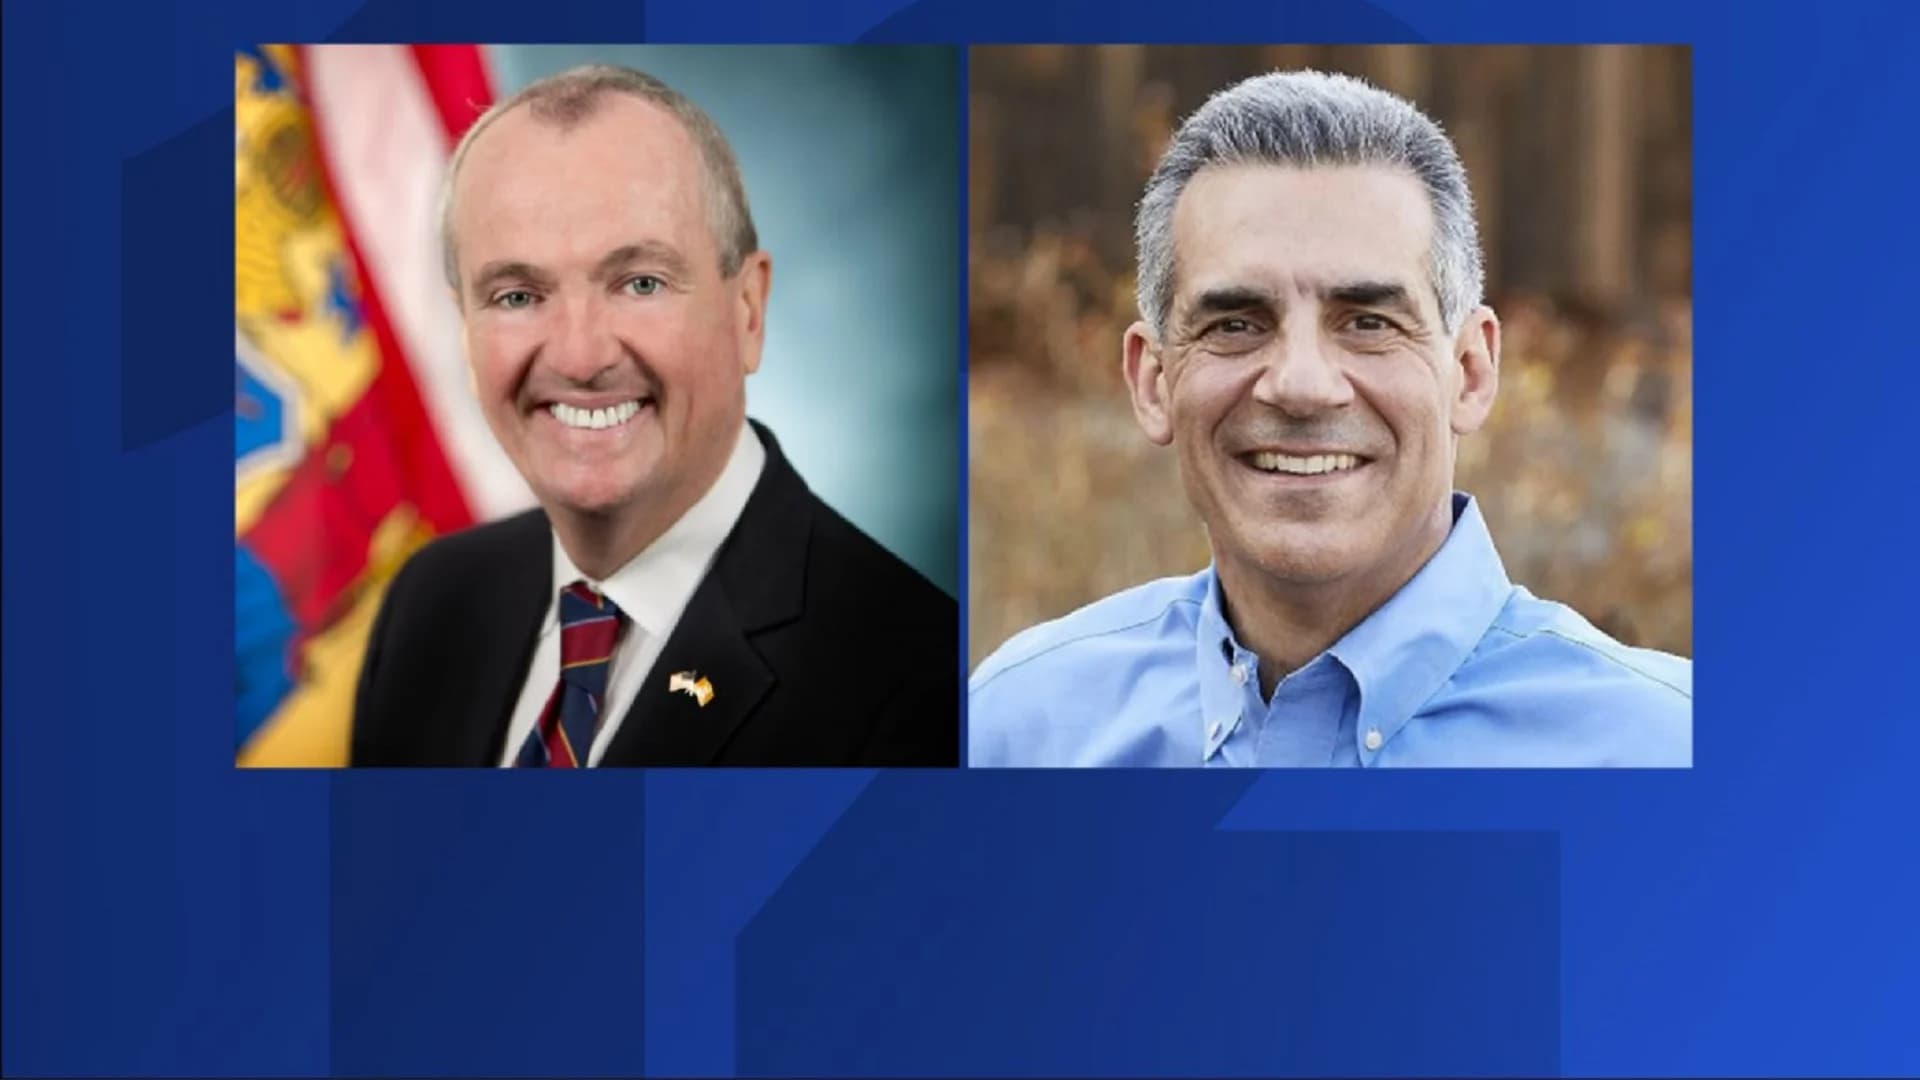 Spending in New Jersey gubernatorial race about even, but Murphy has more banked